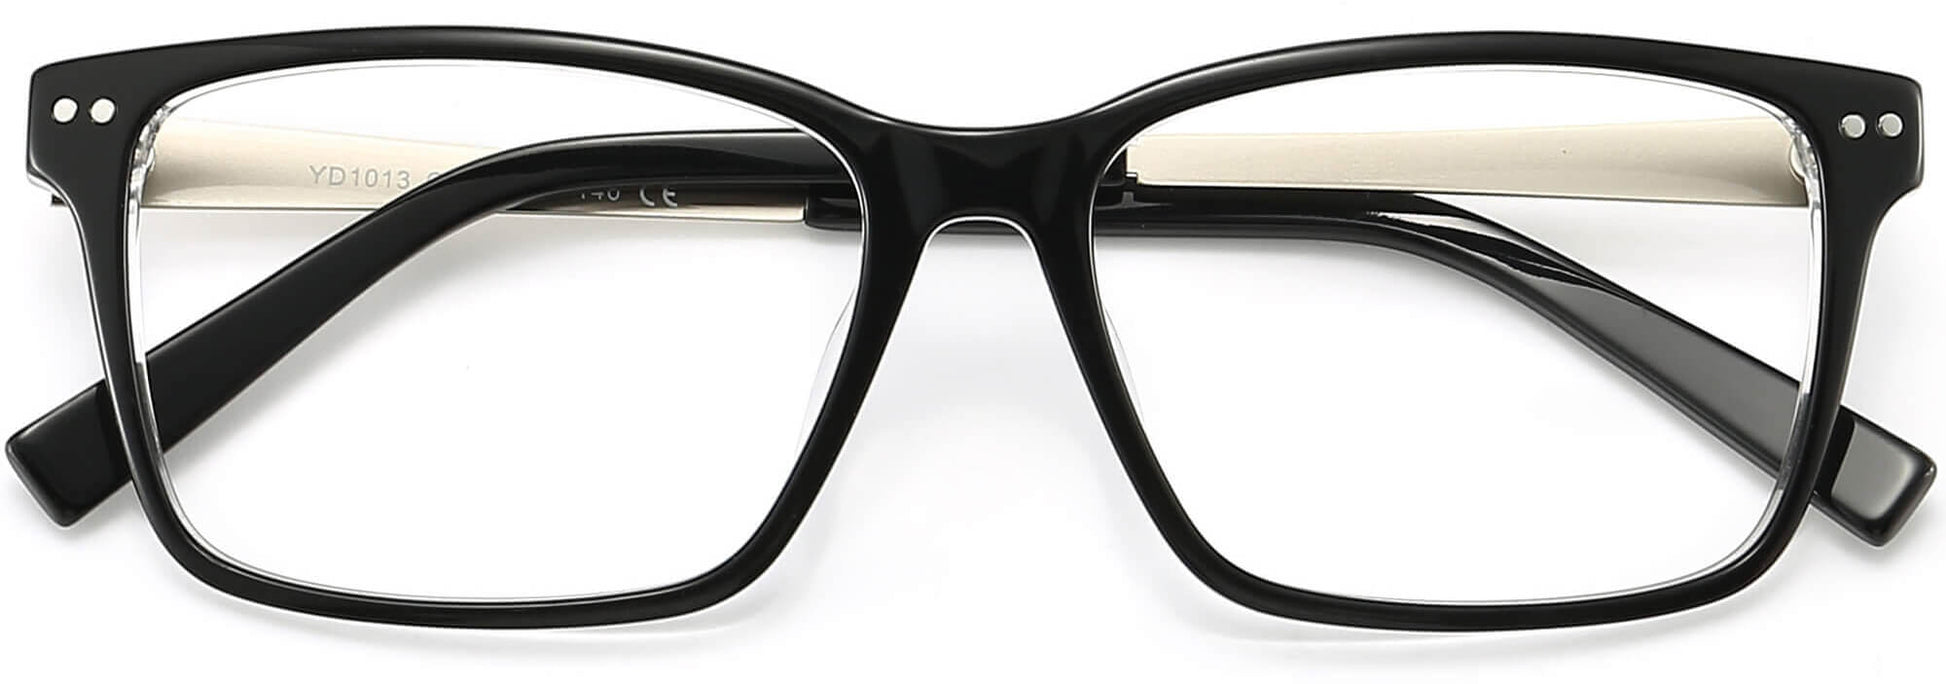 Winston Rectangle Black Eyeglasses from ANRRI, closed view